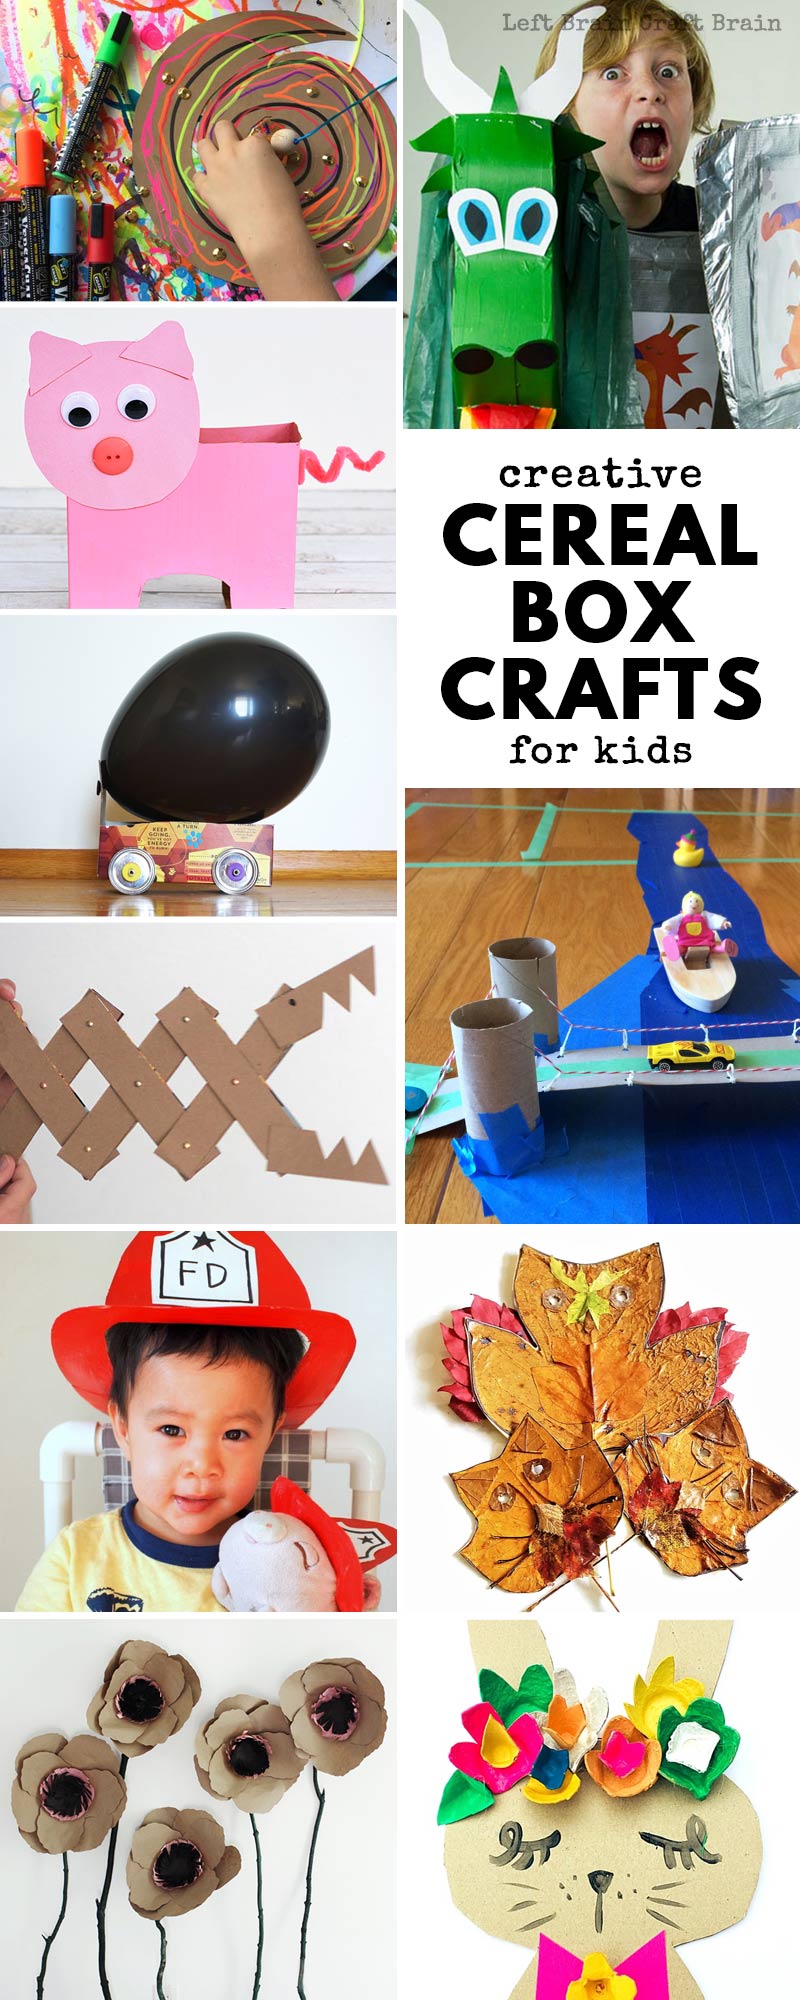 Gather up all those empty cereal boxes! Here's a mega list of 30+ Super Creative Cereal Box Crafts for Kids. Inside this creative list, you'll find cereal box cars, flowers, pretend play props, art projects and tools, cereal box animals, and more. Even a few life hacks, too. Cereal box projects are fun and inexpensive!